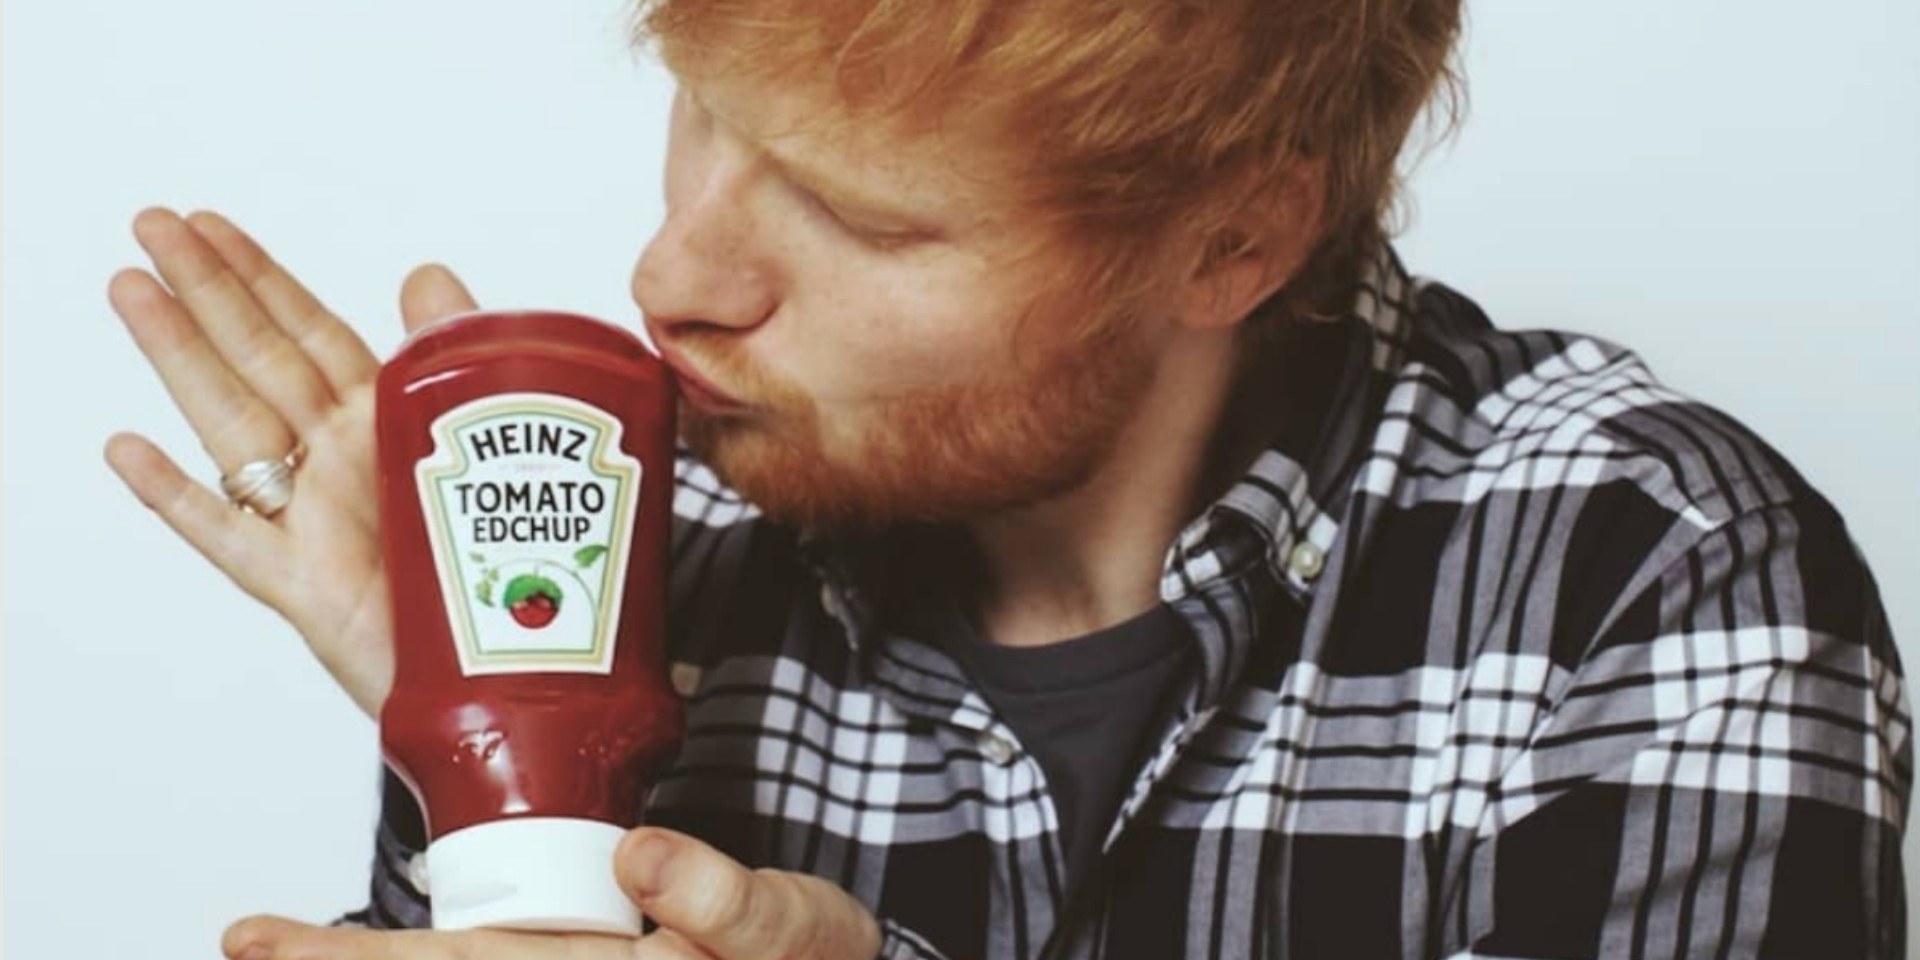 Ed Sheeran has launched his own line of ketchup with Heinz